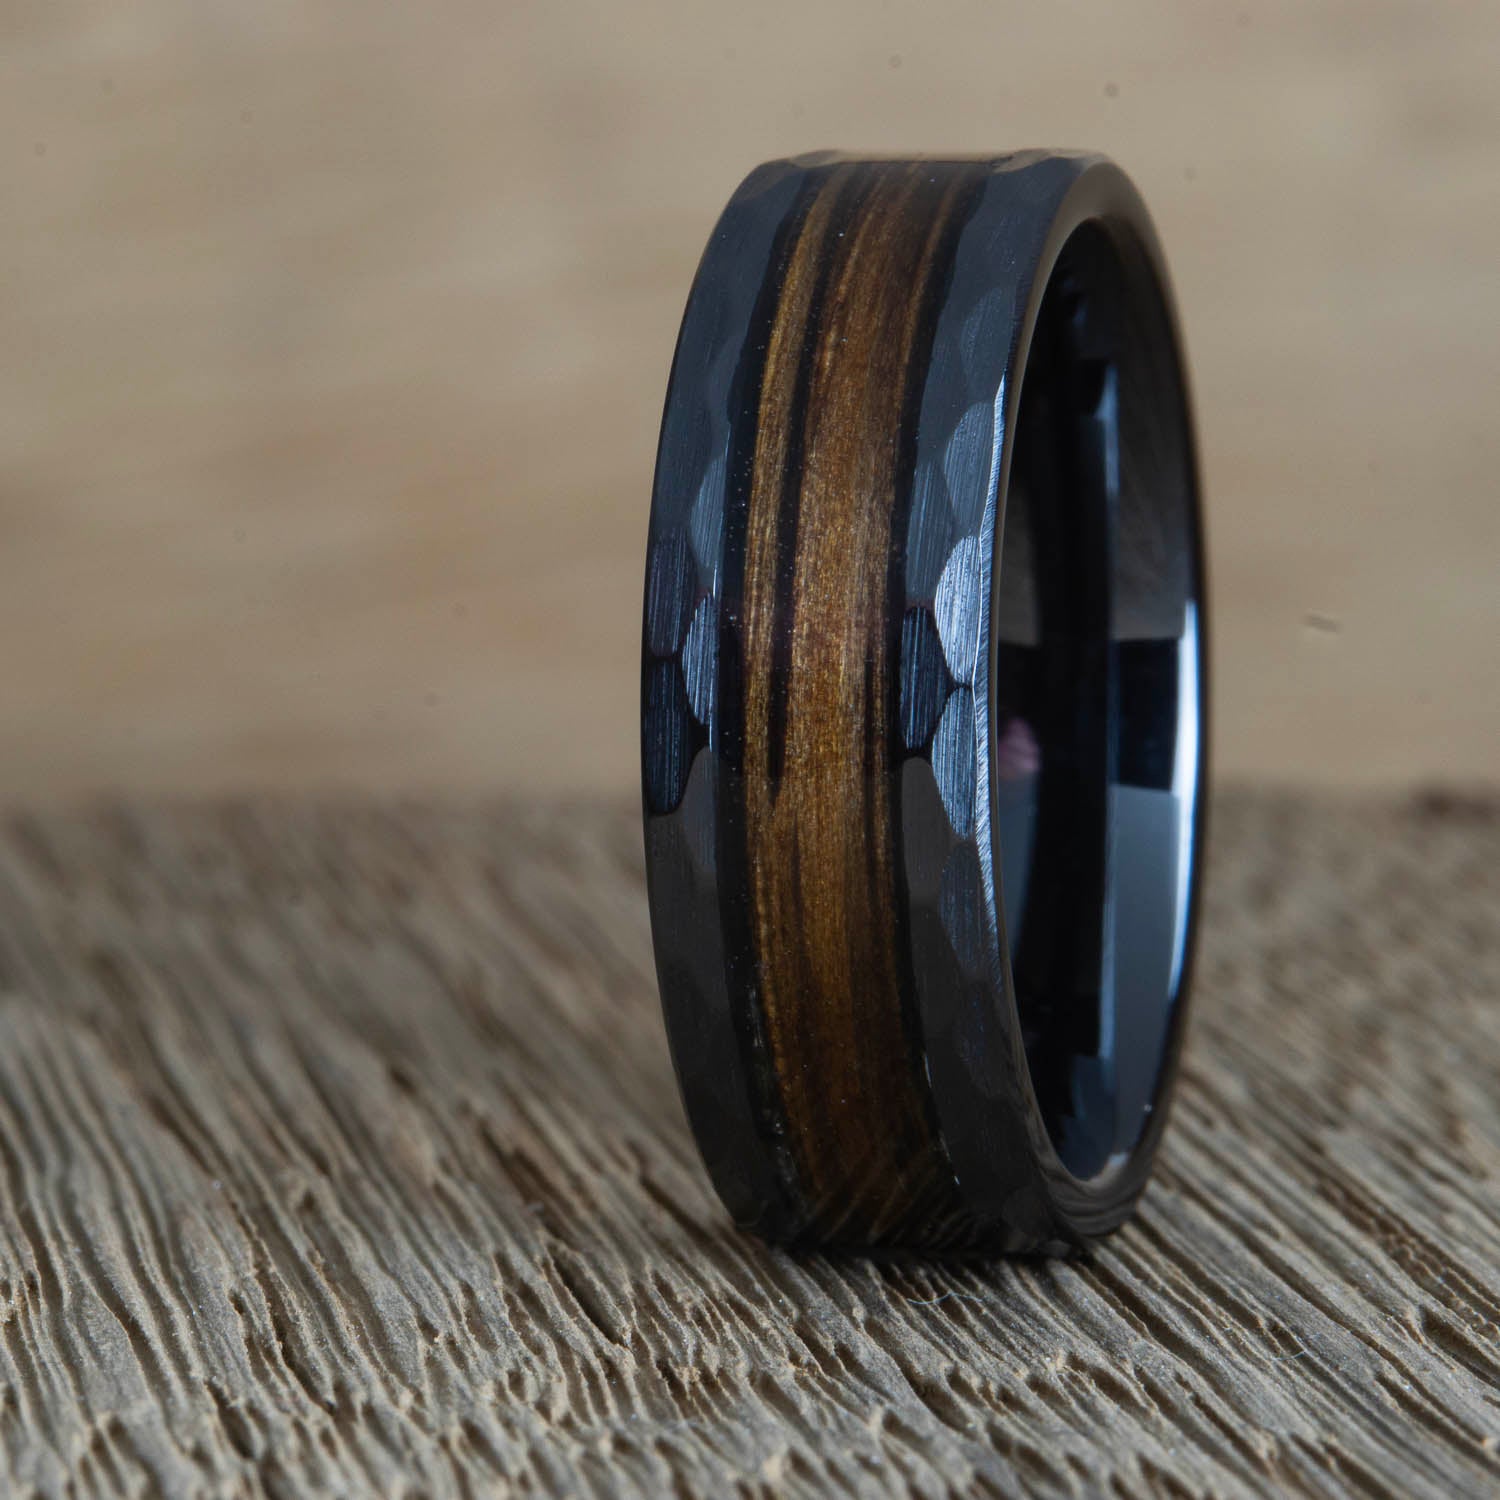 "The Whiskey Hammered" Hammered Black ring with Whiskey barrel wood